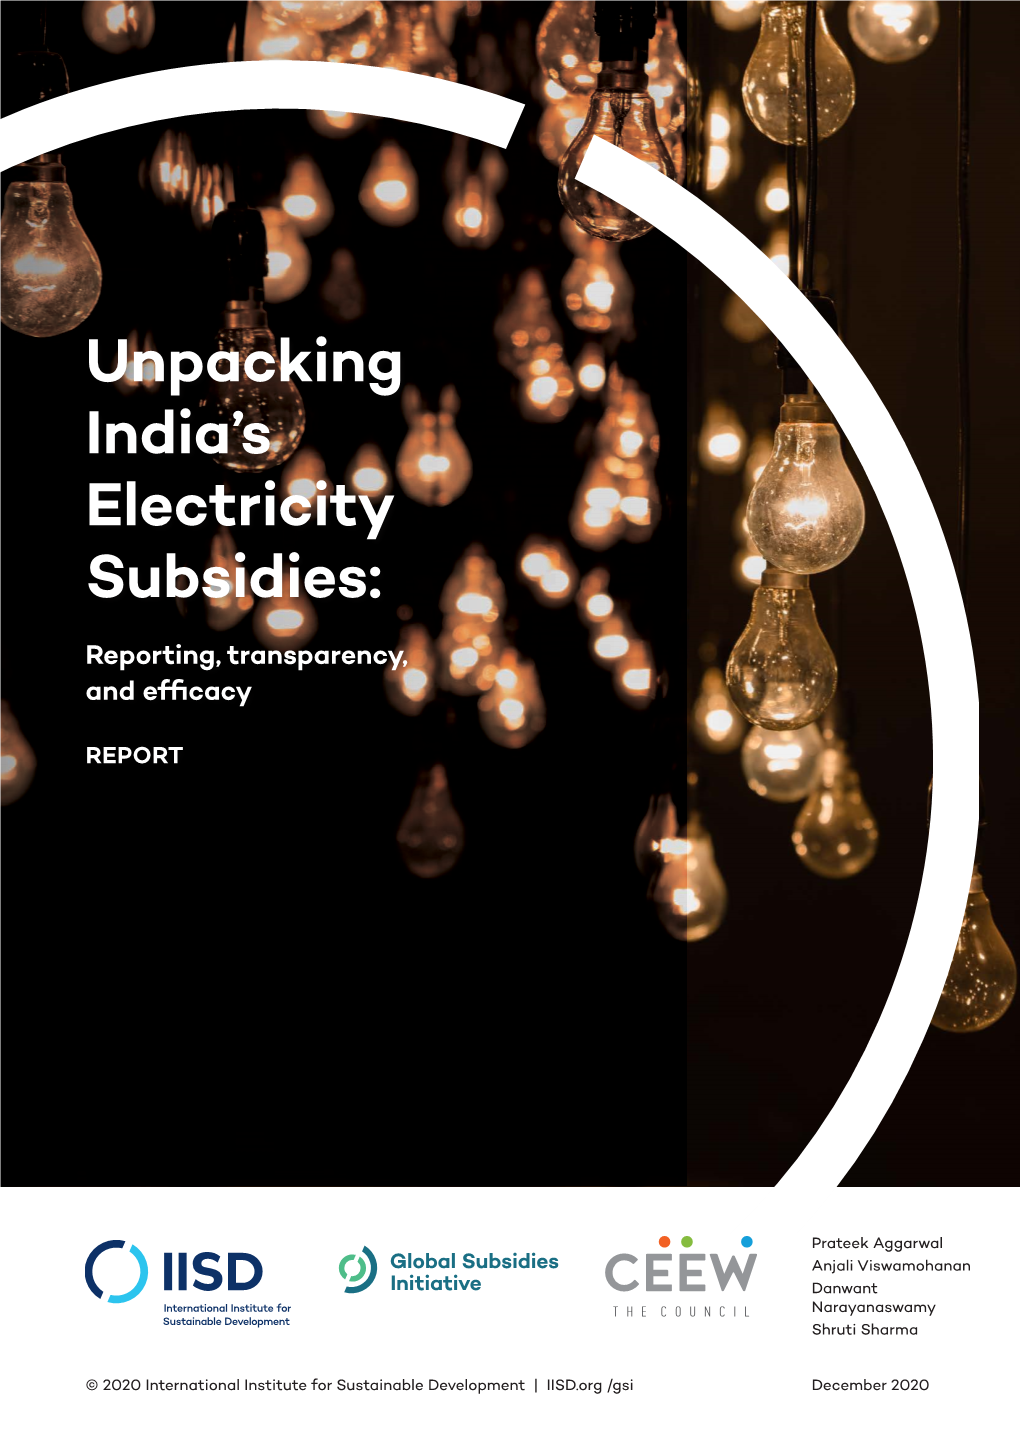 Unpacking India's Electricity Subsidies